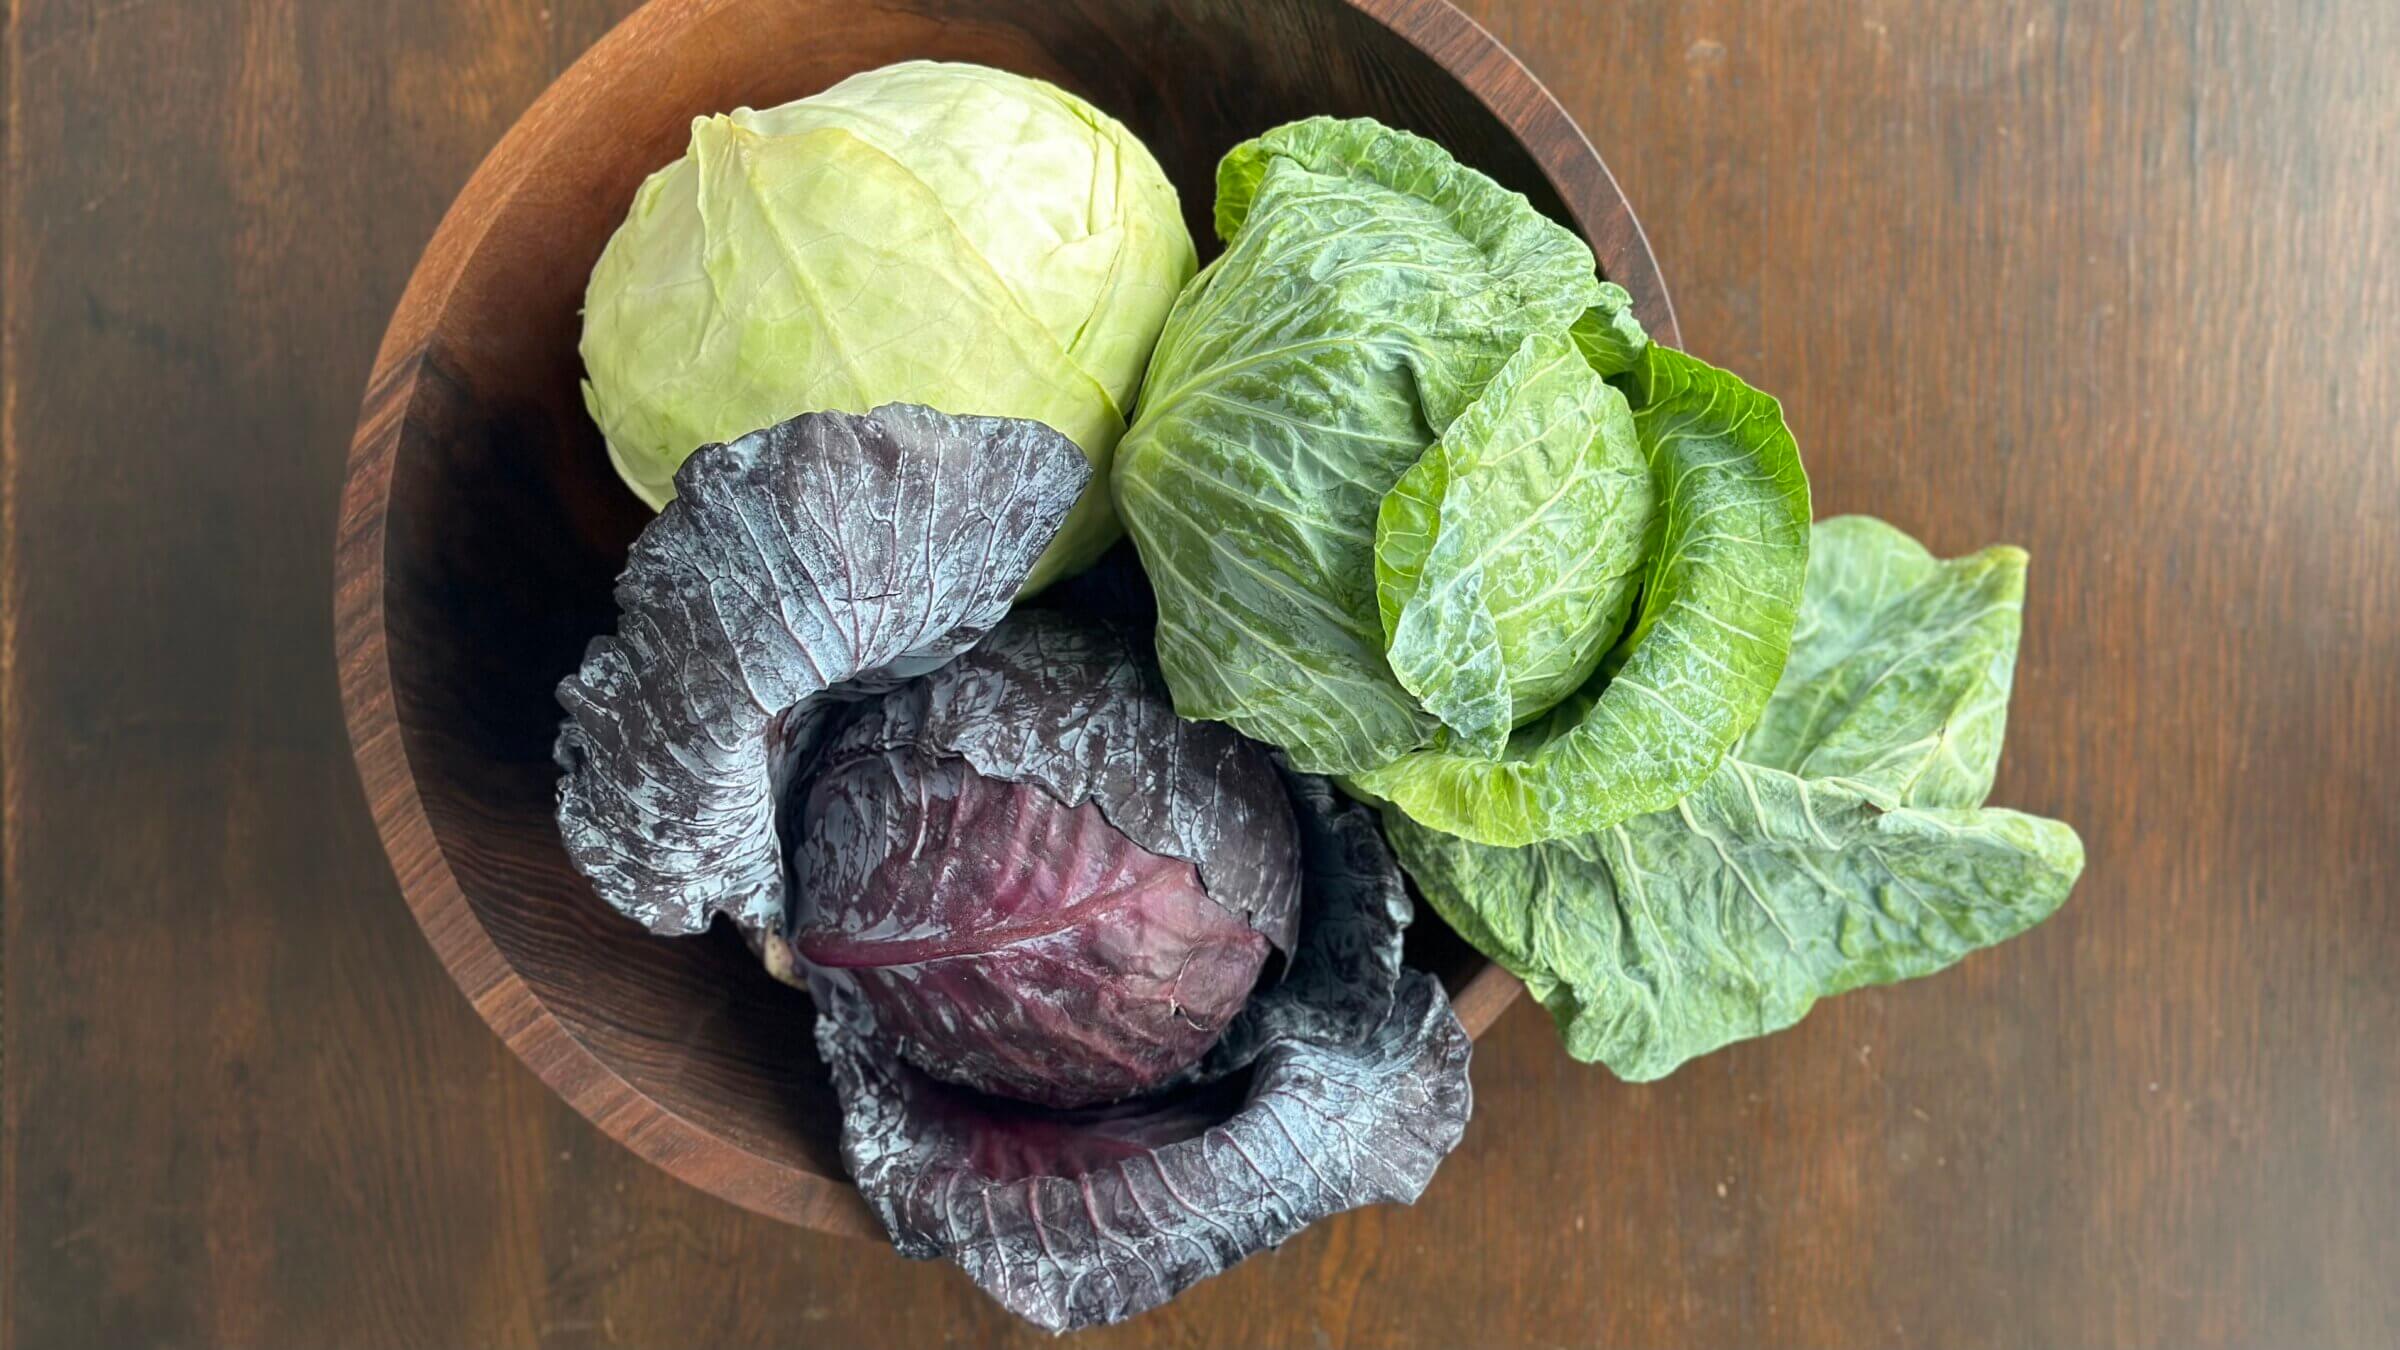 Cabbage is a member of the <i>Brassica</i> family, which includes such vegetables as broccoli, bok choy, kale, collards, turnips, arugula and Brussels sprouts.